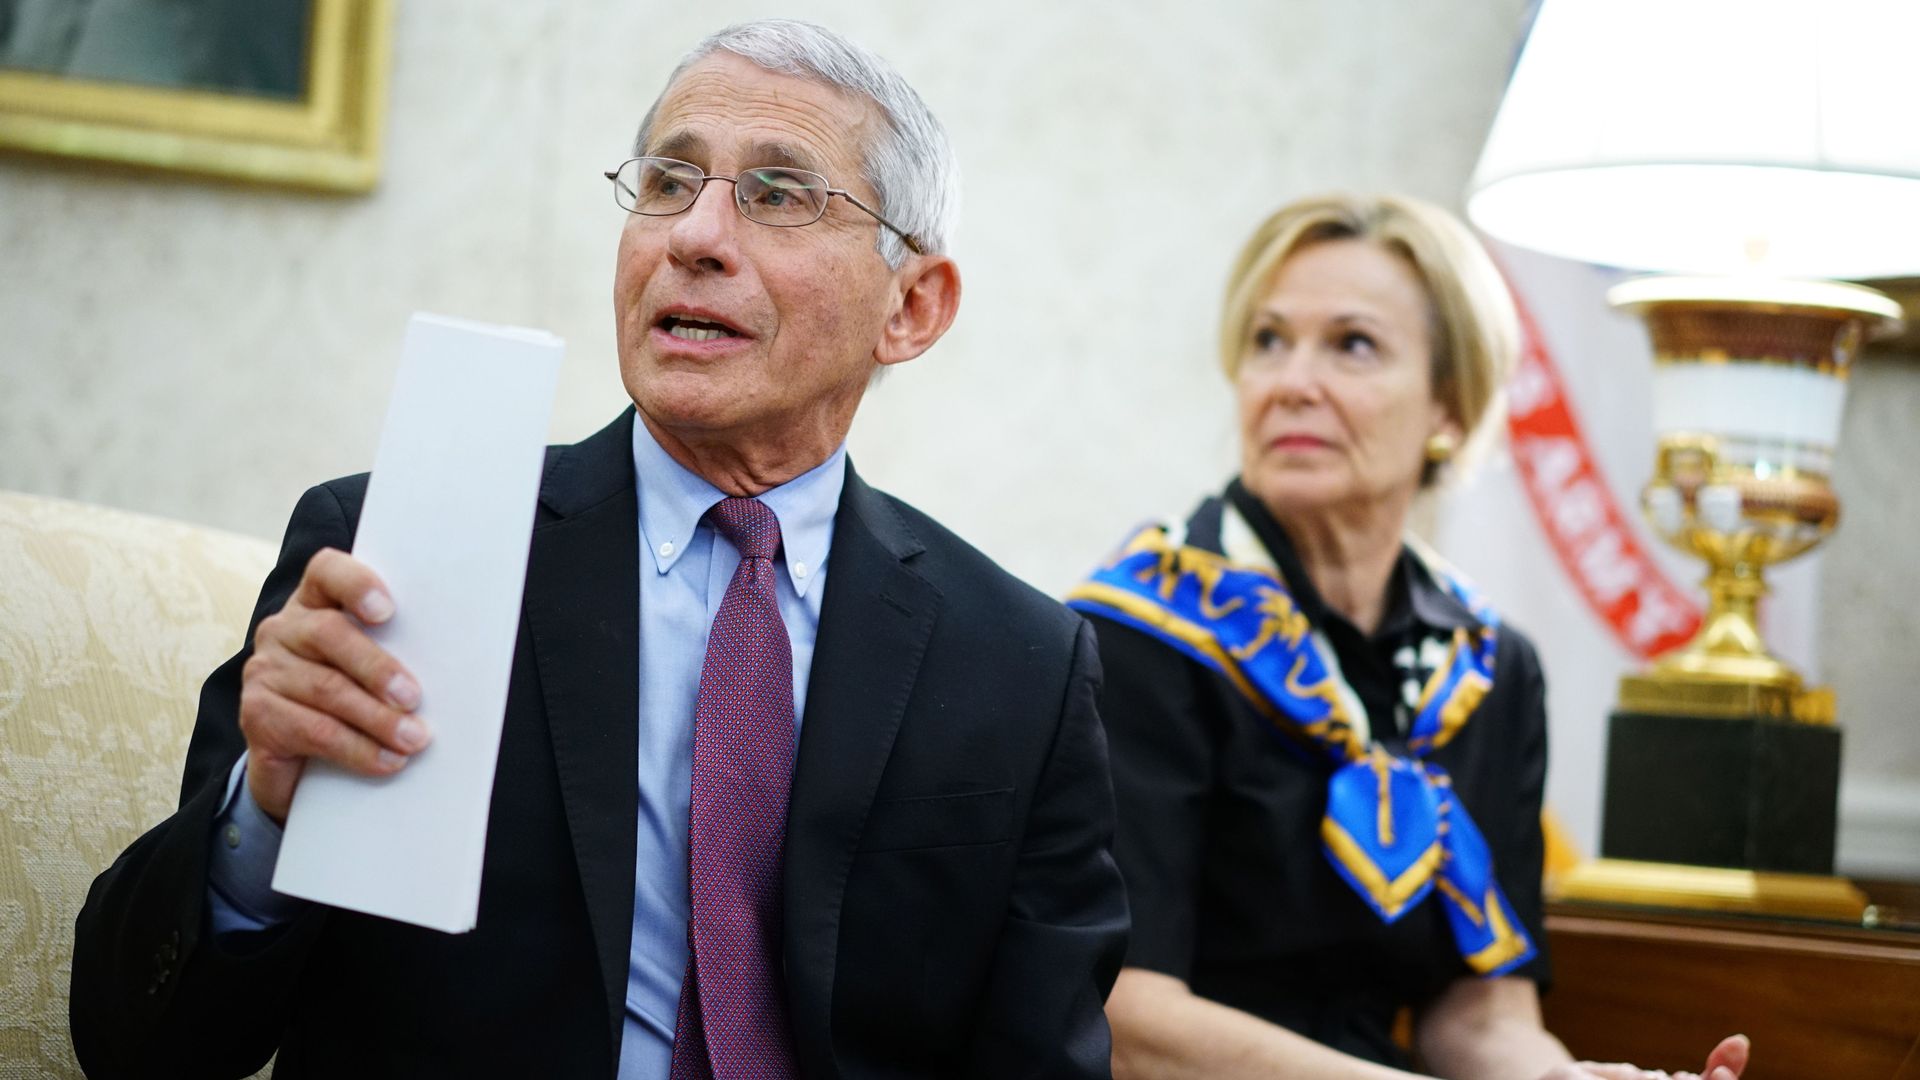 In this image, Anthony Fauci sits in front of Dr. Birx